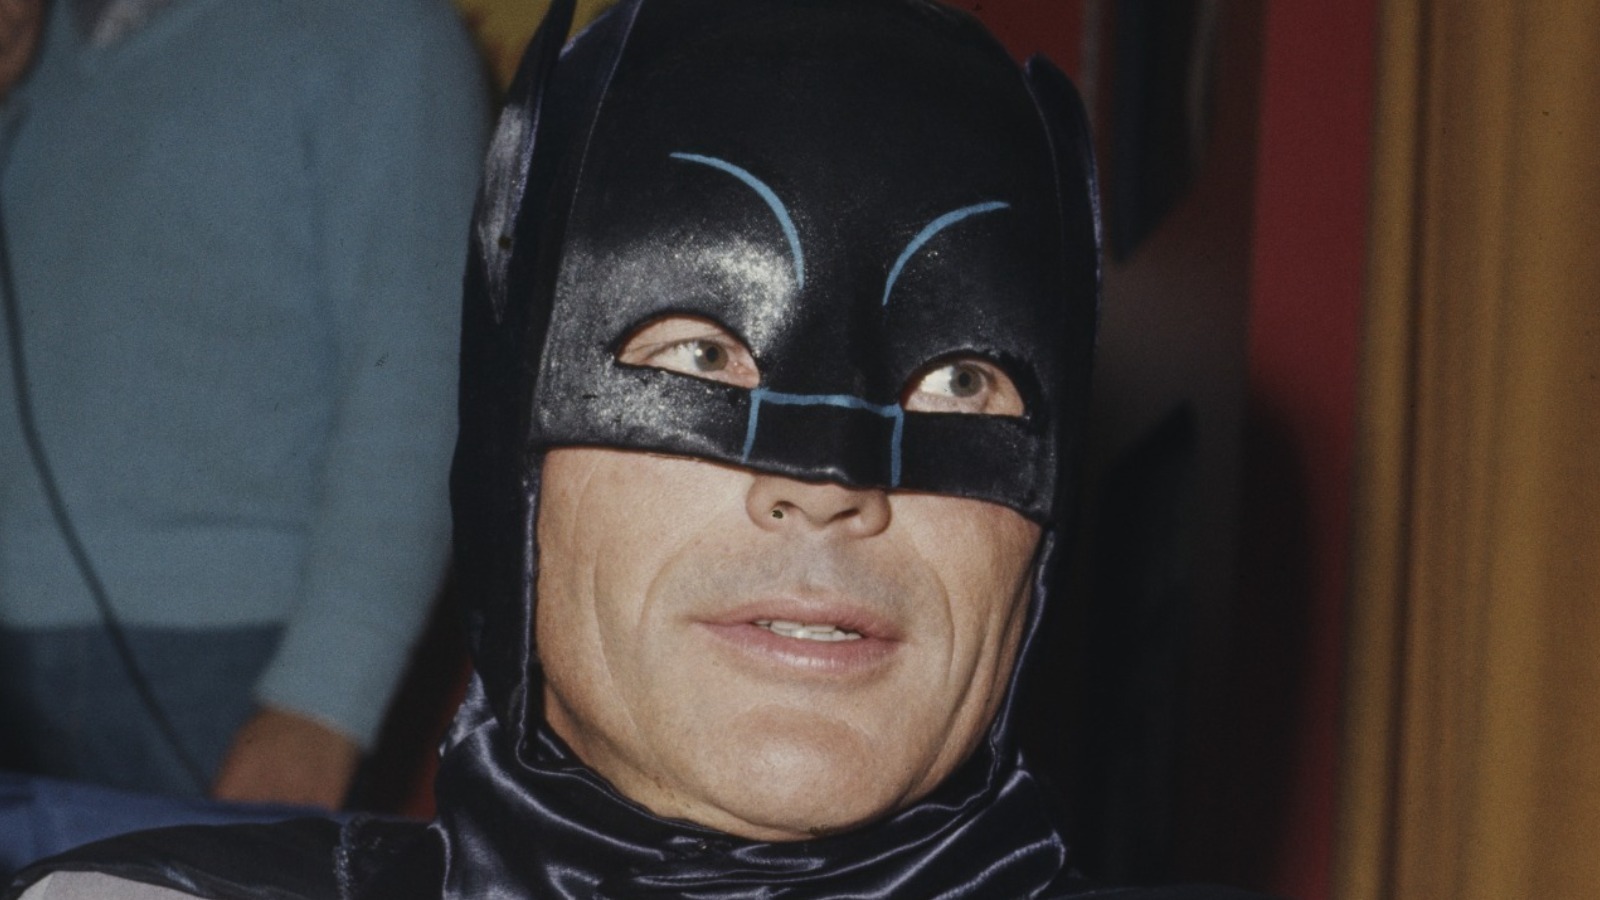 The Adam West Reference You Likely Missed In The Batman